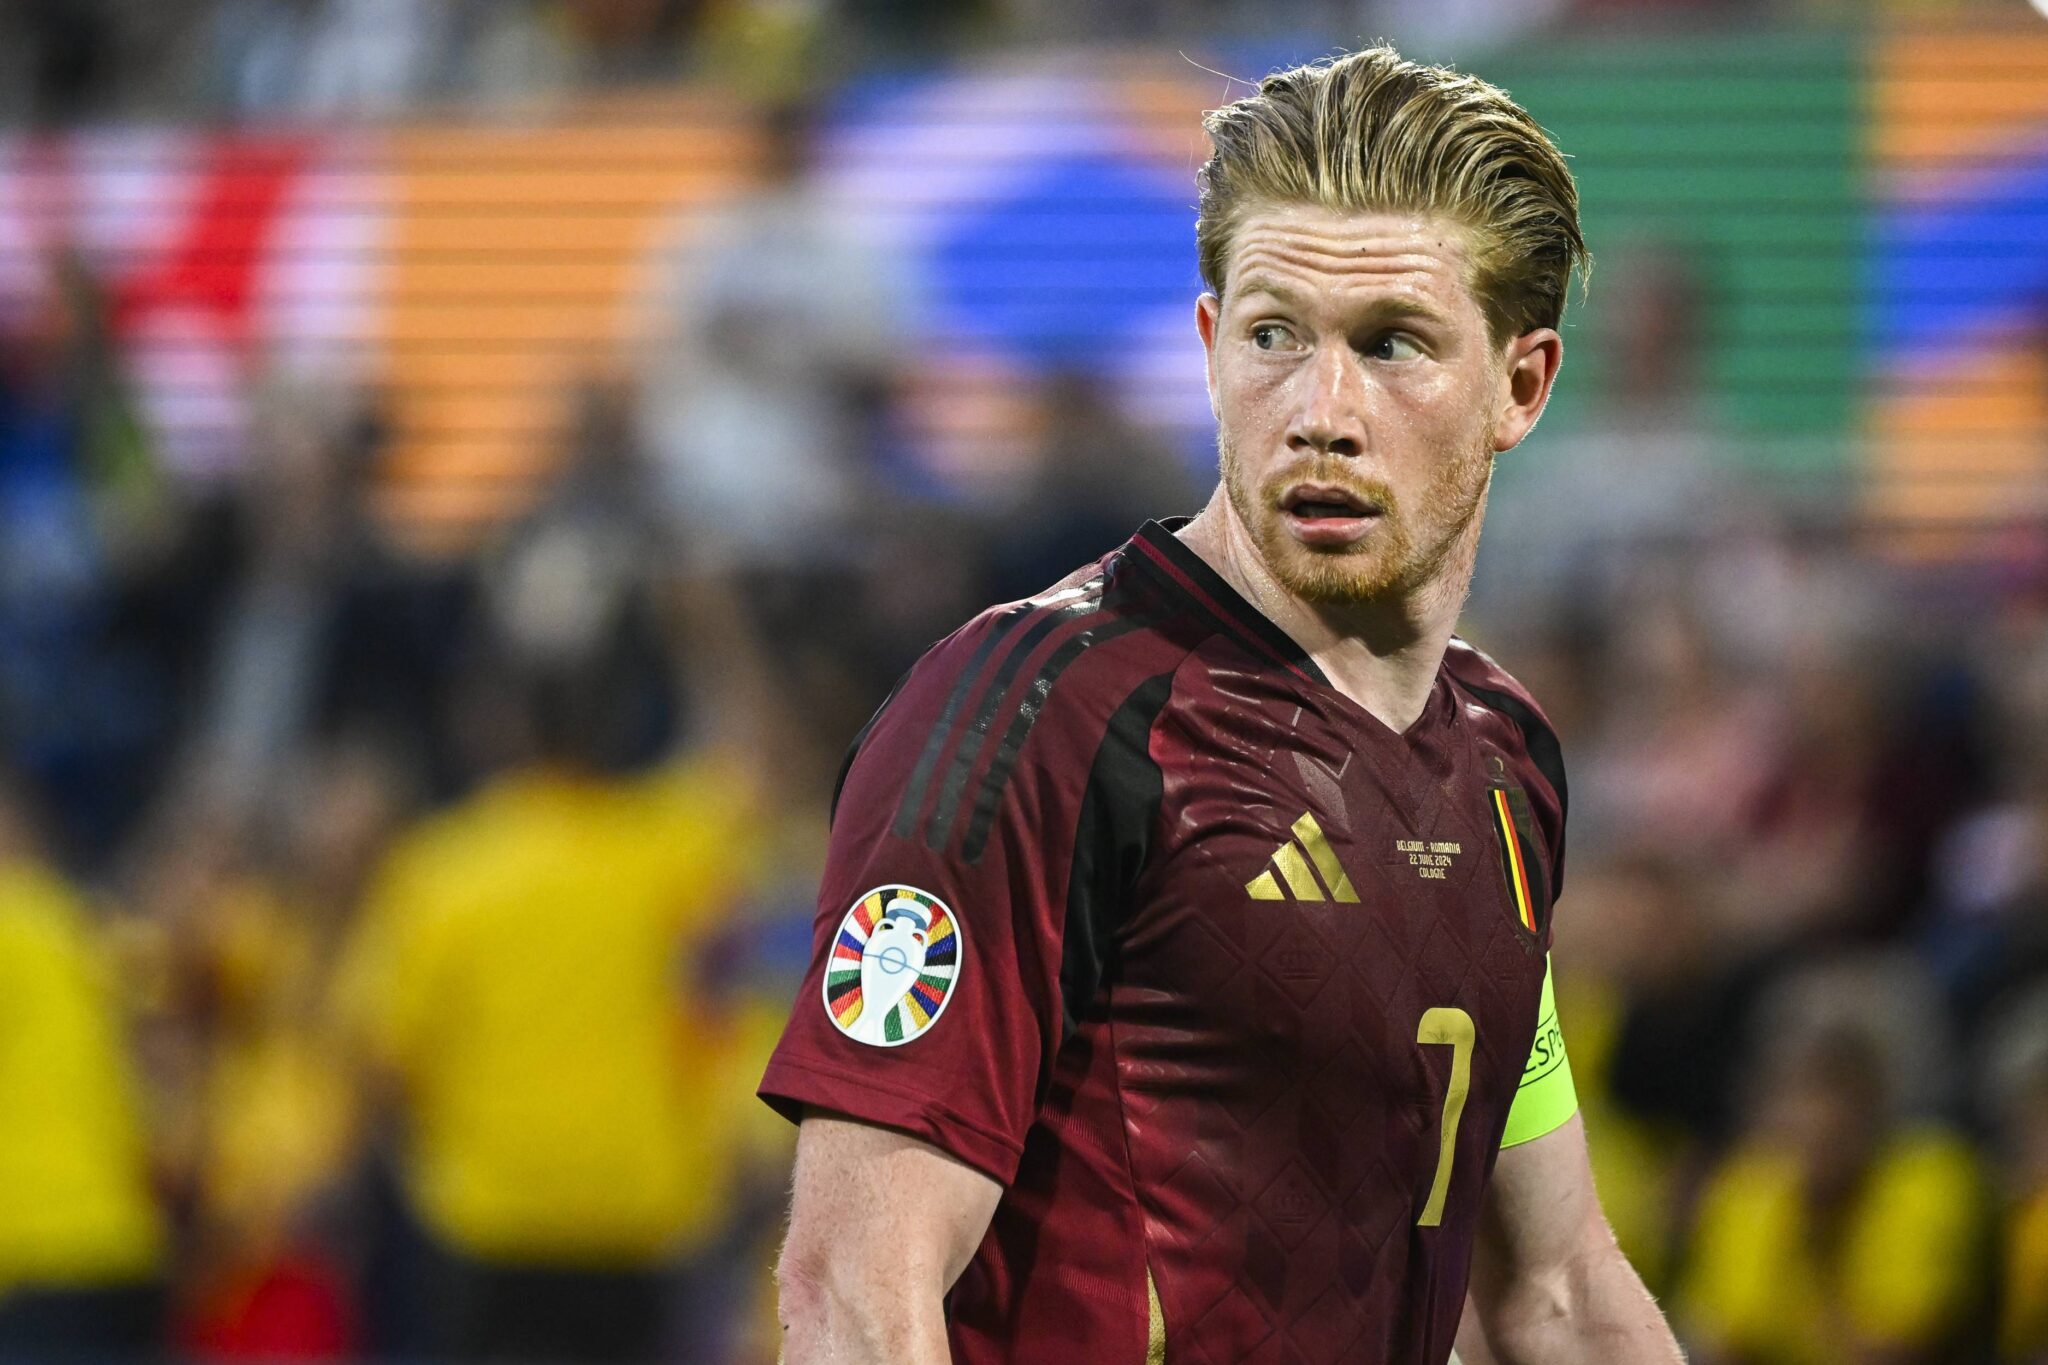 June 22, 2024, Cologne, Germany: Belgium&#039;s Kevin De Bruyne pictured during a soccer game between Belgian national soccer team Red Devils and Romania, Saturday 22 June 2024 in Cologne, Germany, the second match in the group stage of the UEFA Euro 2024 European championships. (Credit Image: © Dirk Waem/Belga via ZUMA Press) 
UEFA EURO NIEMCY 2024
ME MISTRZOSTWA EUROPY W PILCE NOZNEJ PILKA NOZNA
BELGIA v RUMUNIA
FOT. ZUMA/newspix.pl / 400mm.pl

POLAND ONLY !!!
---
newspix.pl / 400mm.pl